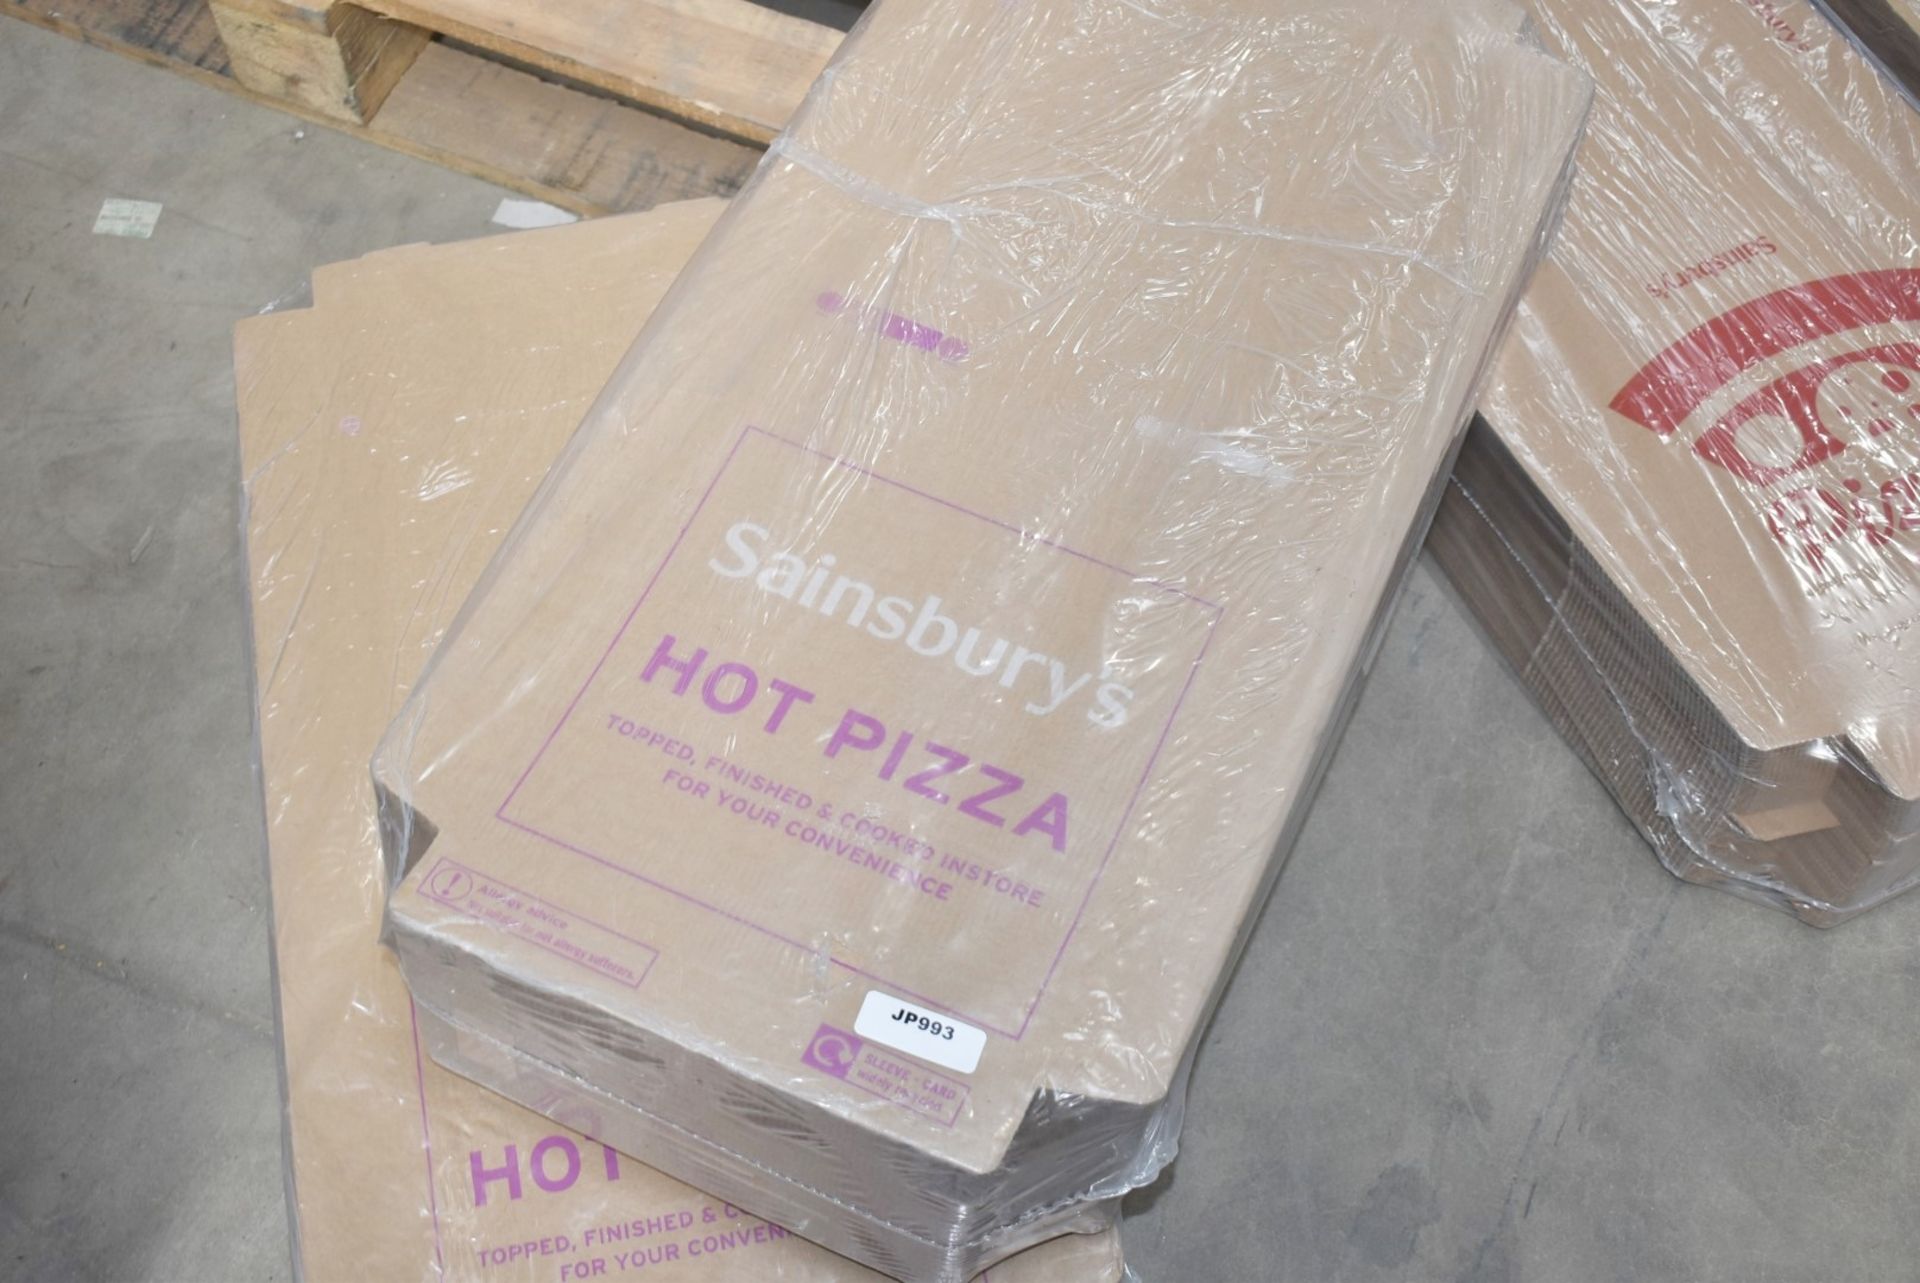 300 x Supermarket Branded 10 Inch Pizza Boxes - Includes 3 x Boxes of 100 - New and Sealed - CL232 - - Image 8 of 11